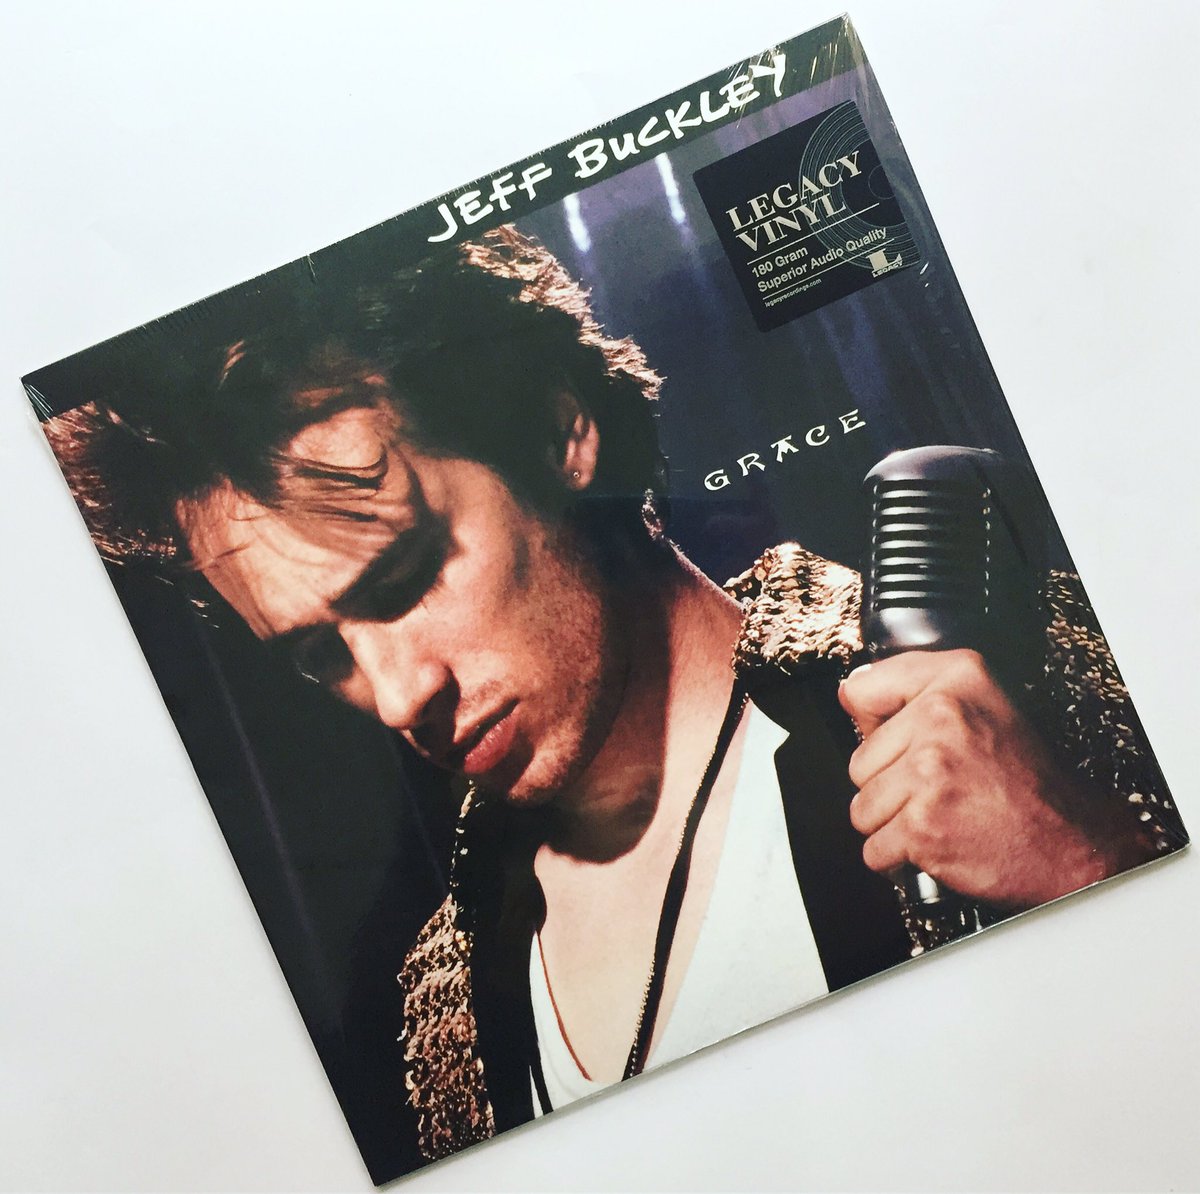 killing pedal udtale Vinyl Tap Records on Twitter: "Back in stock: Jeff Buckley- Grace. 10 track  180g heavyweight legacy vinyl edition. Available in store &amp; online at  https://t.co/qe4DSyqENI https://t.co/5Qf7x203bG" / X